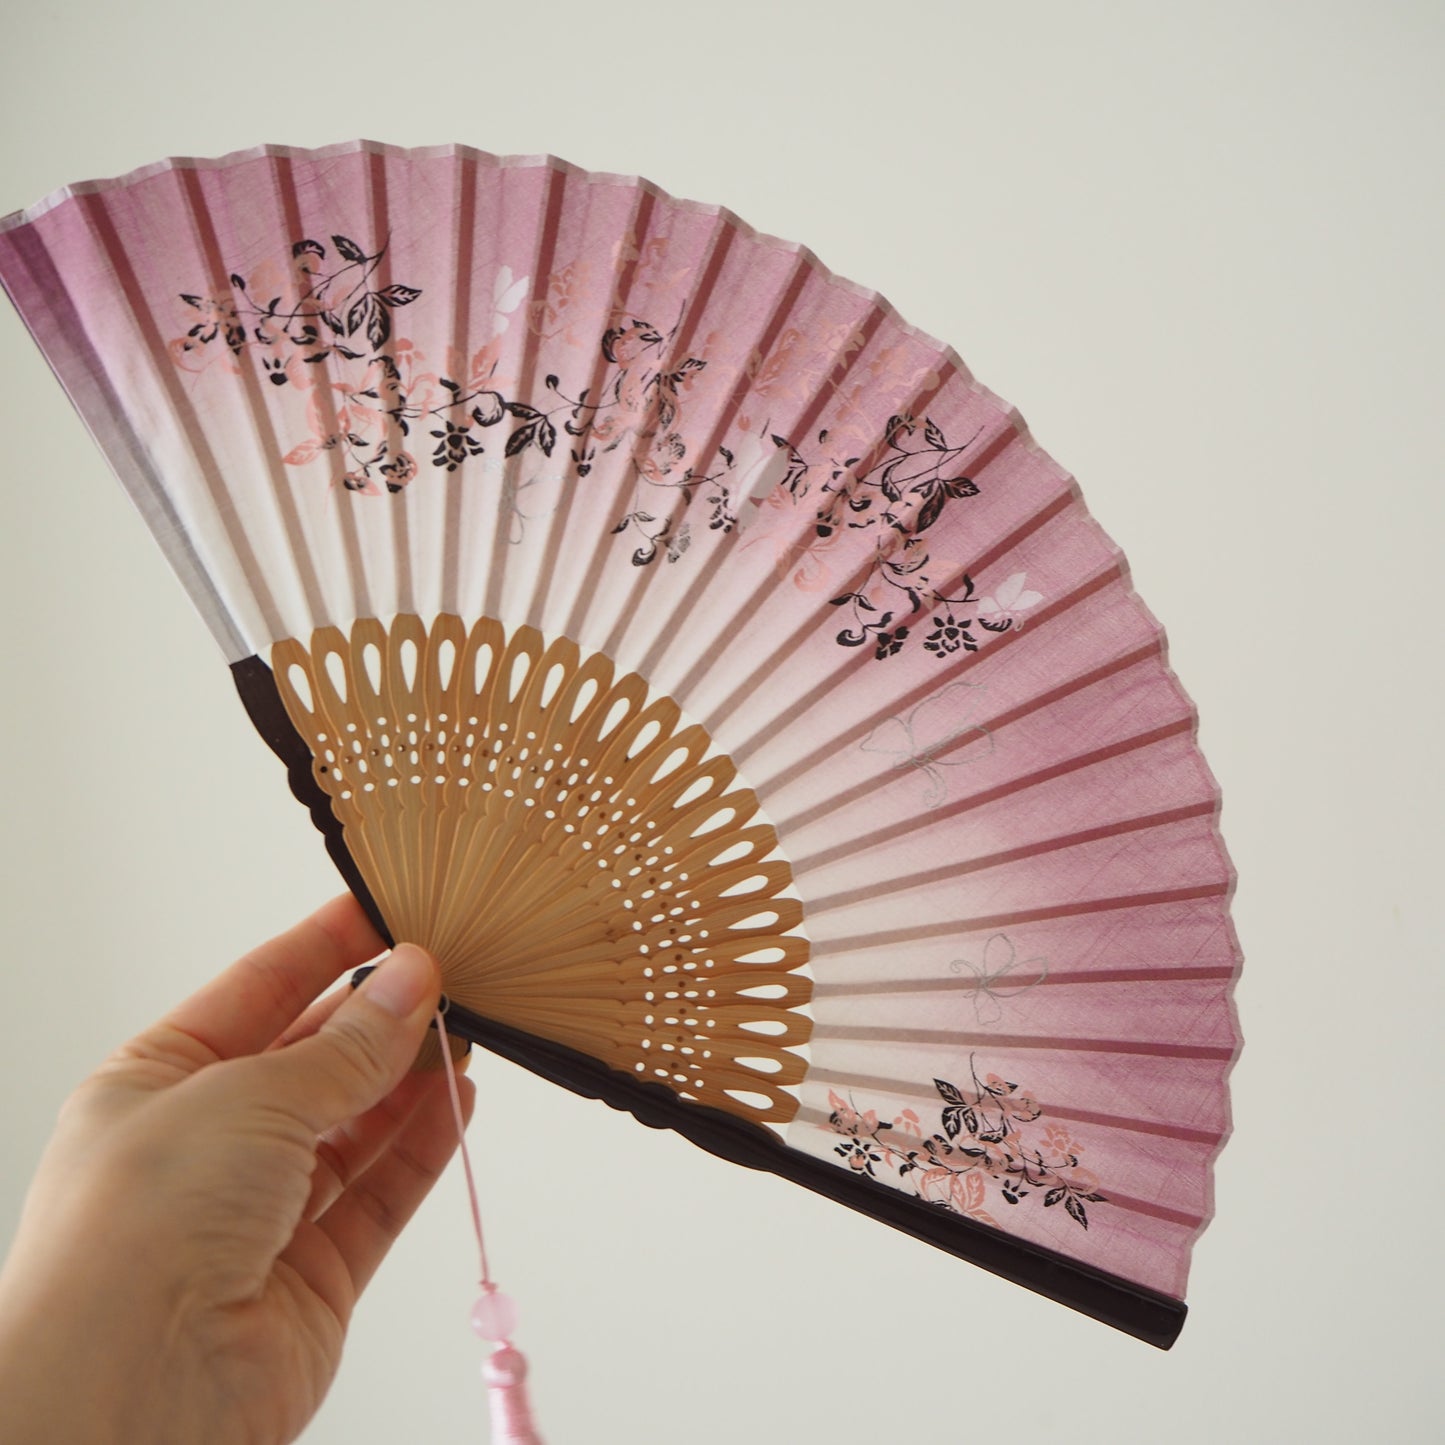 Folding Fan - Lilac and White Floral Pattern